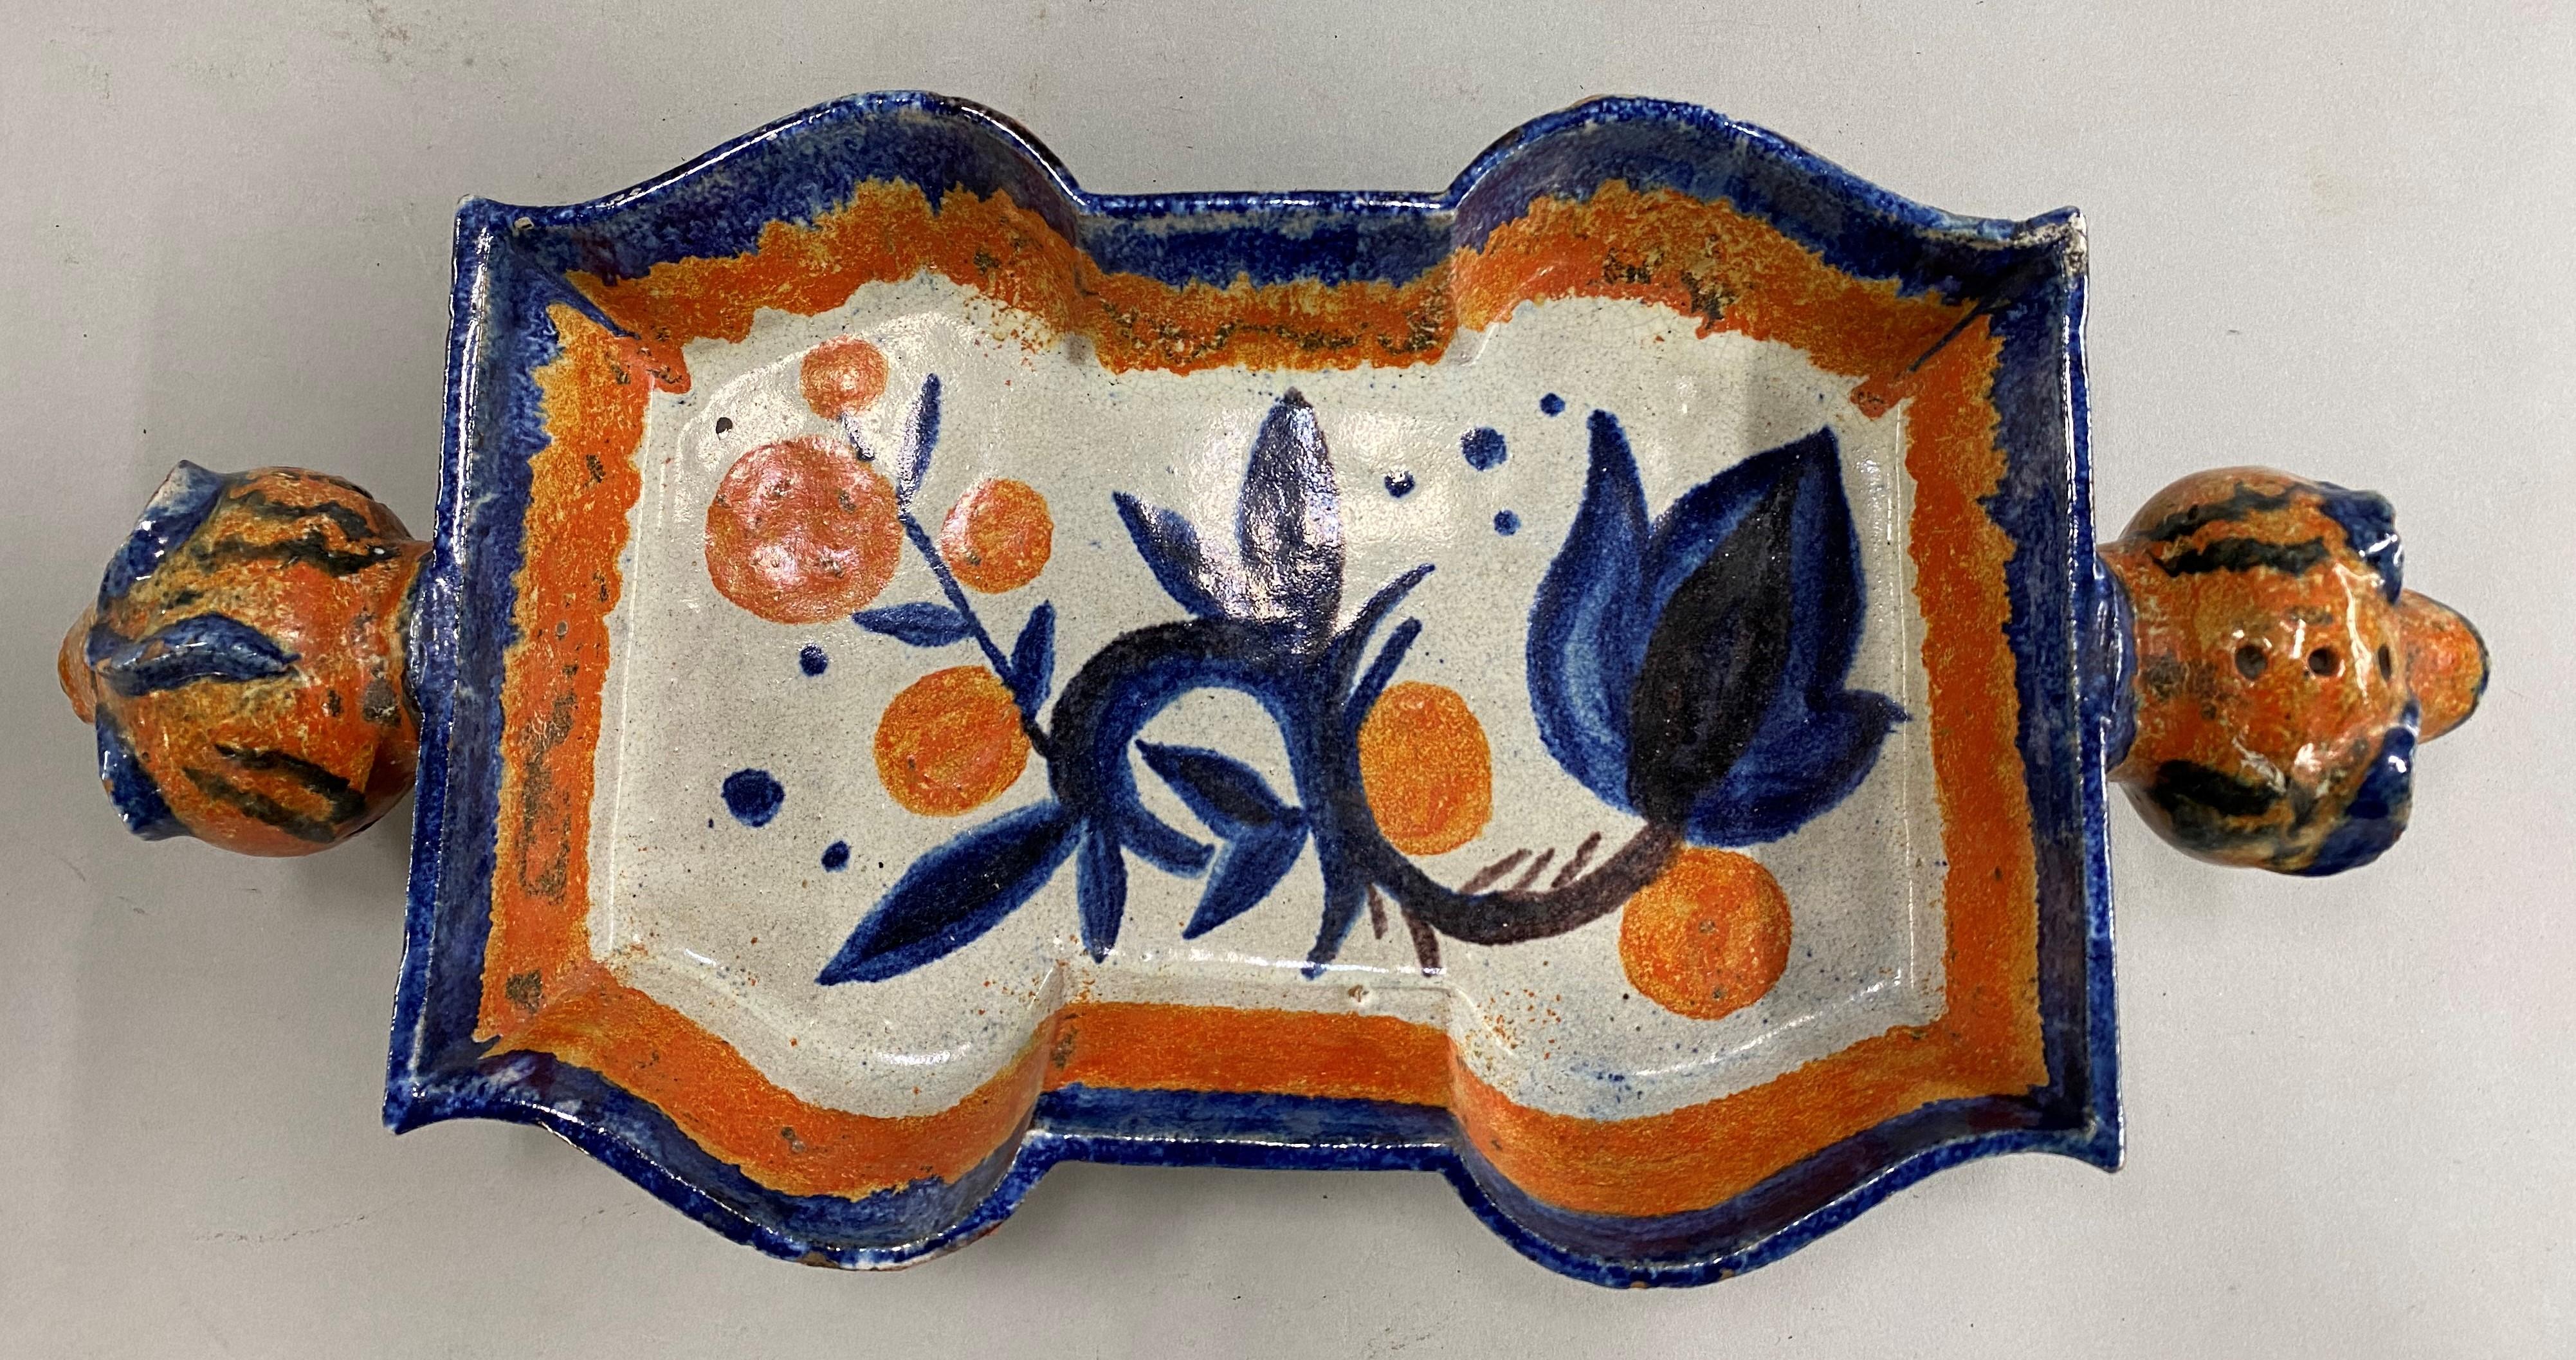 A fine ceramic polychrome centerpiece with animal head handles and bold foliate decoration, by Austrian American ceramic artist Valerie “Vally” Wieselthier (1895-1945) for Wiener Werkstätte, established in 1903 by the graphic designer and painter